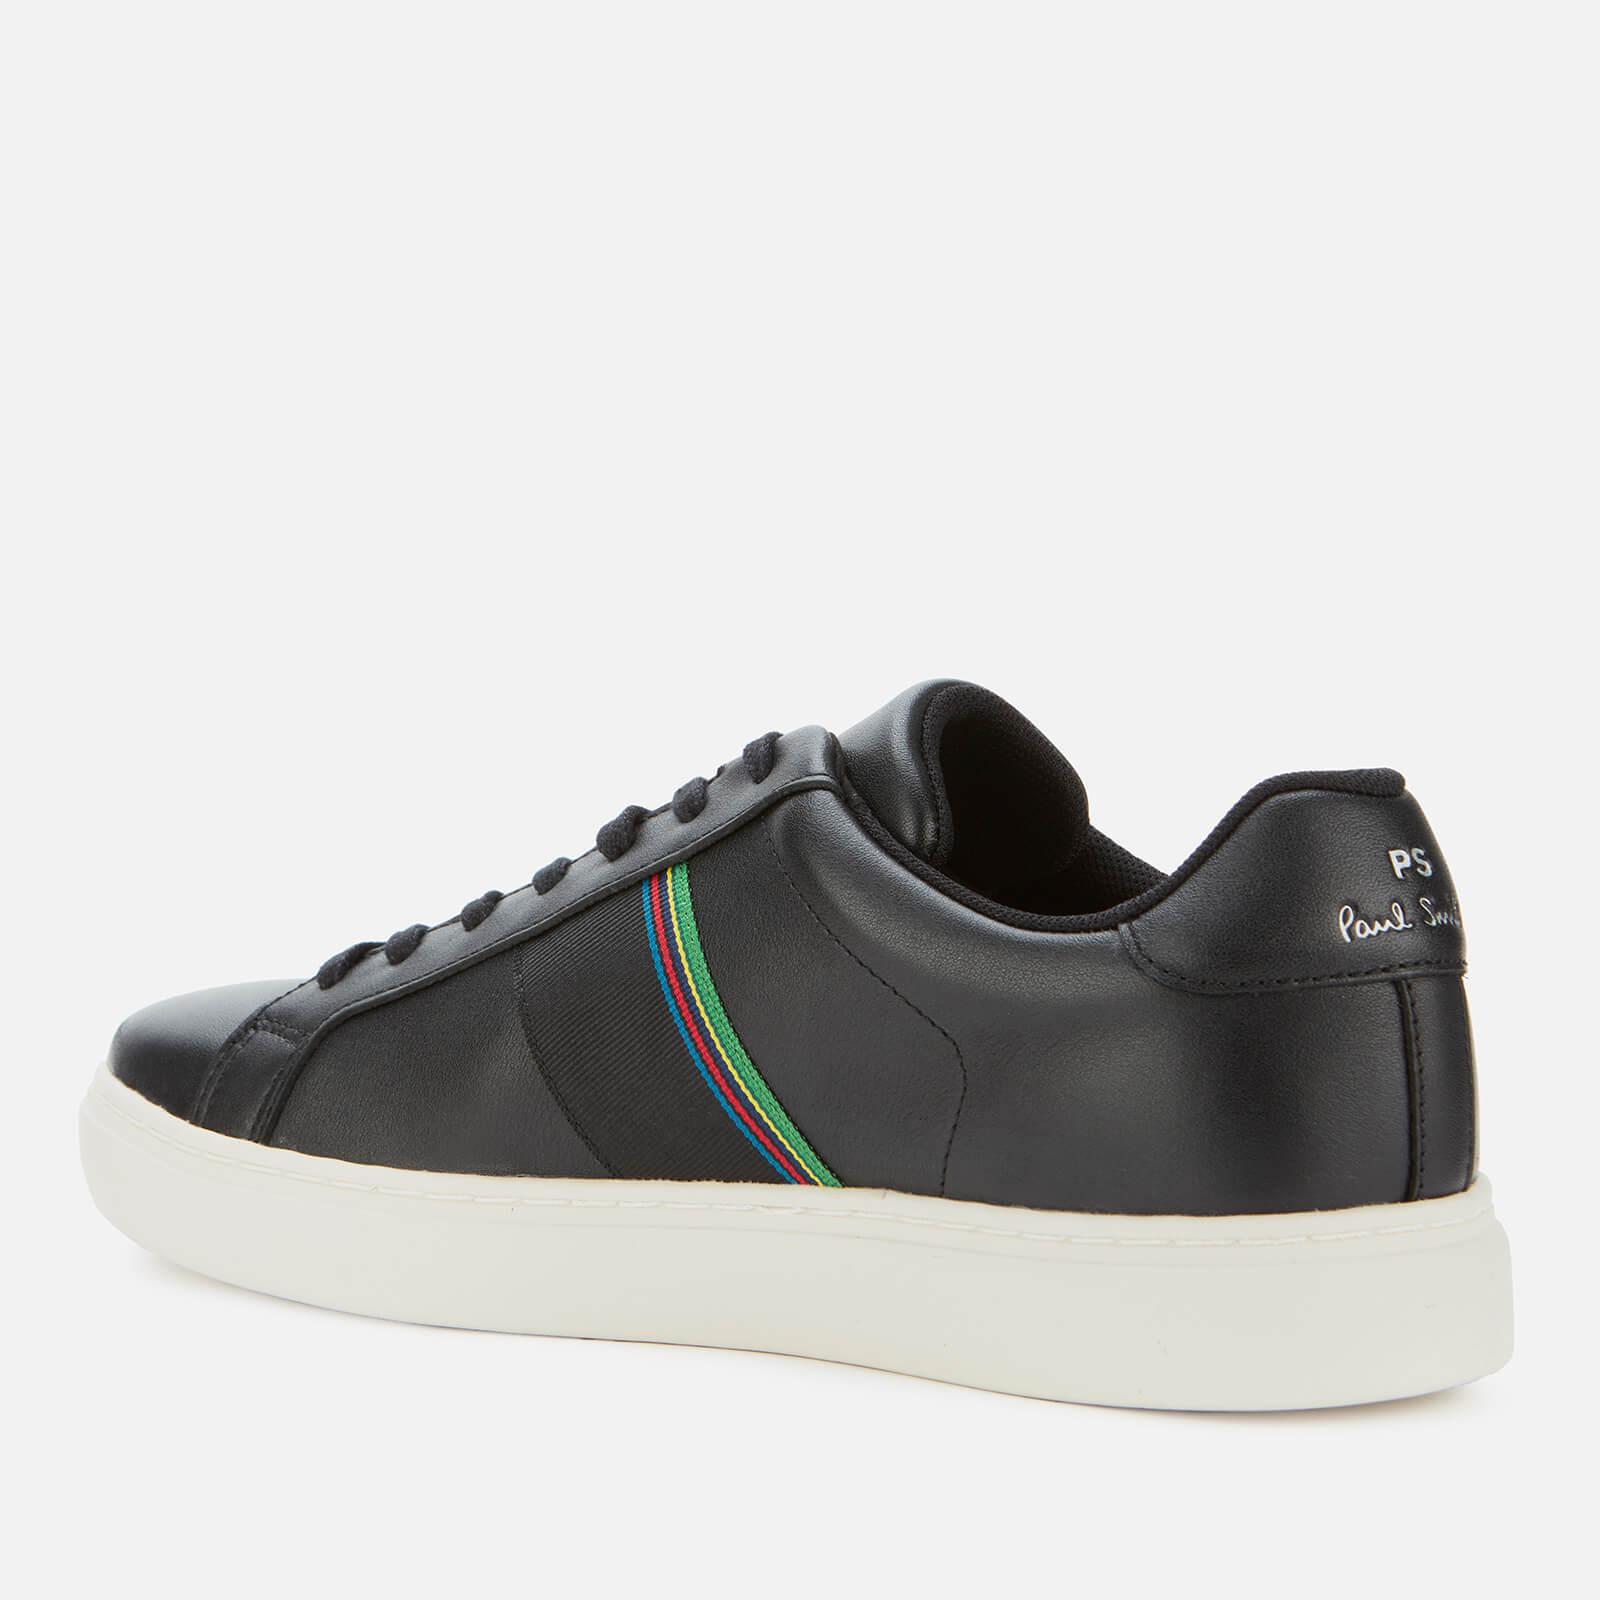 PS by Paul Smith Rex Leather Low Top Trainers in Black for Men - Lyst